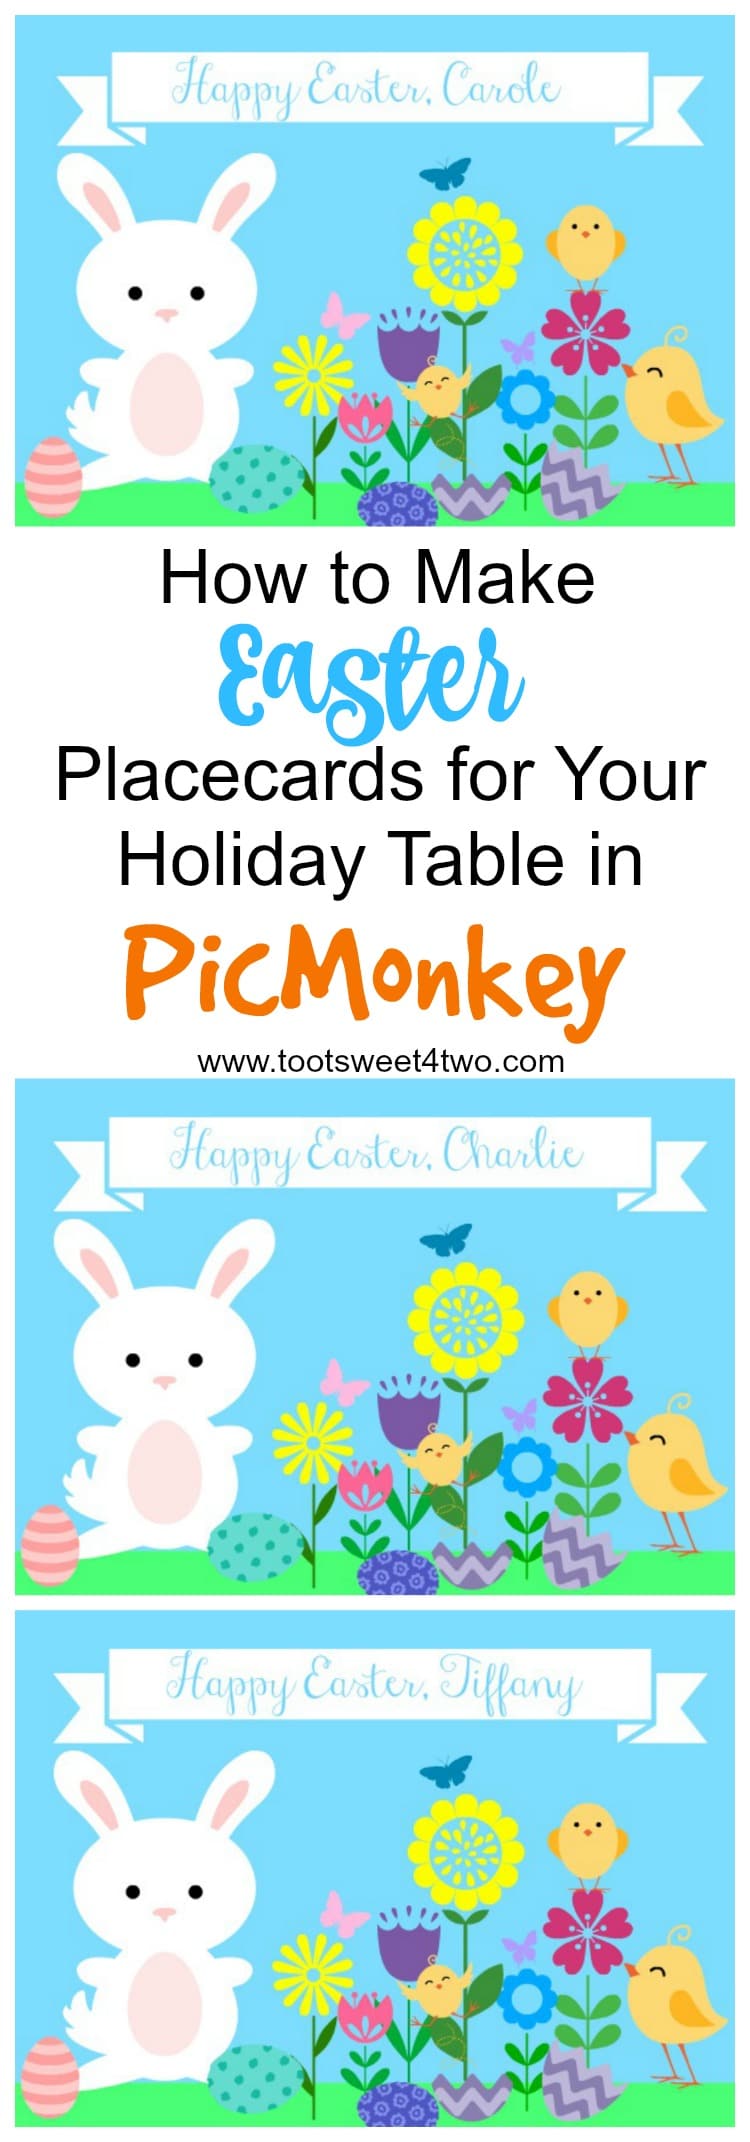 How to Make Easter Placecards in PicMonkey - Pinterest collage